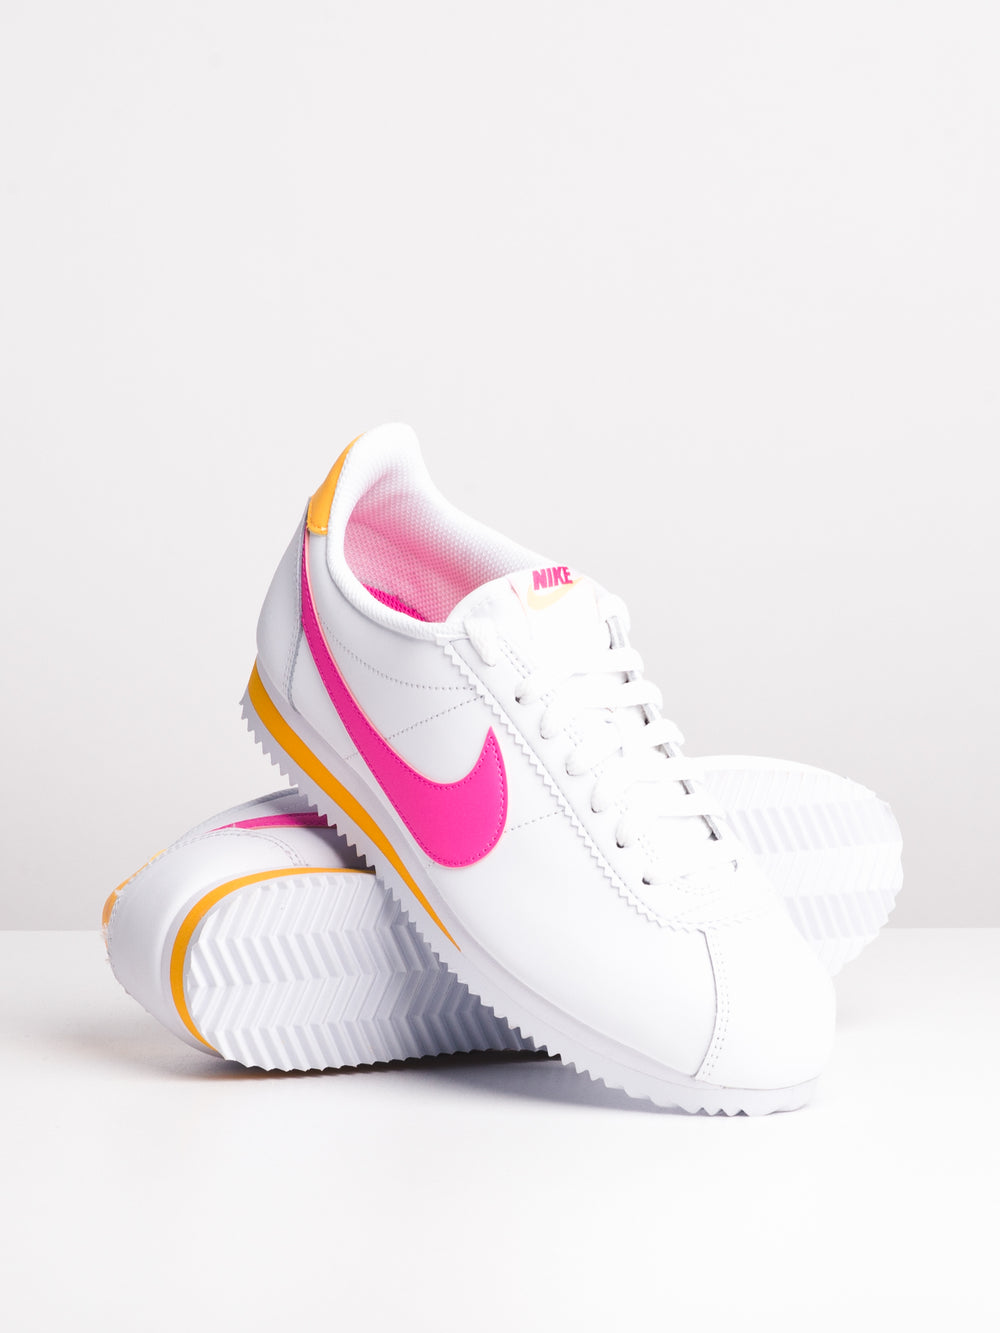 nike cortez pink and yellow